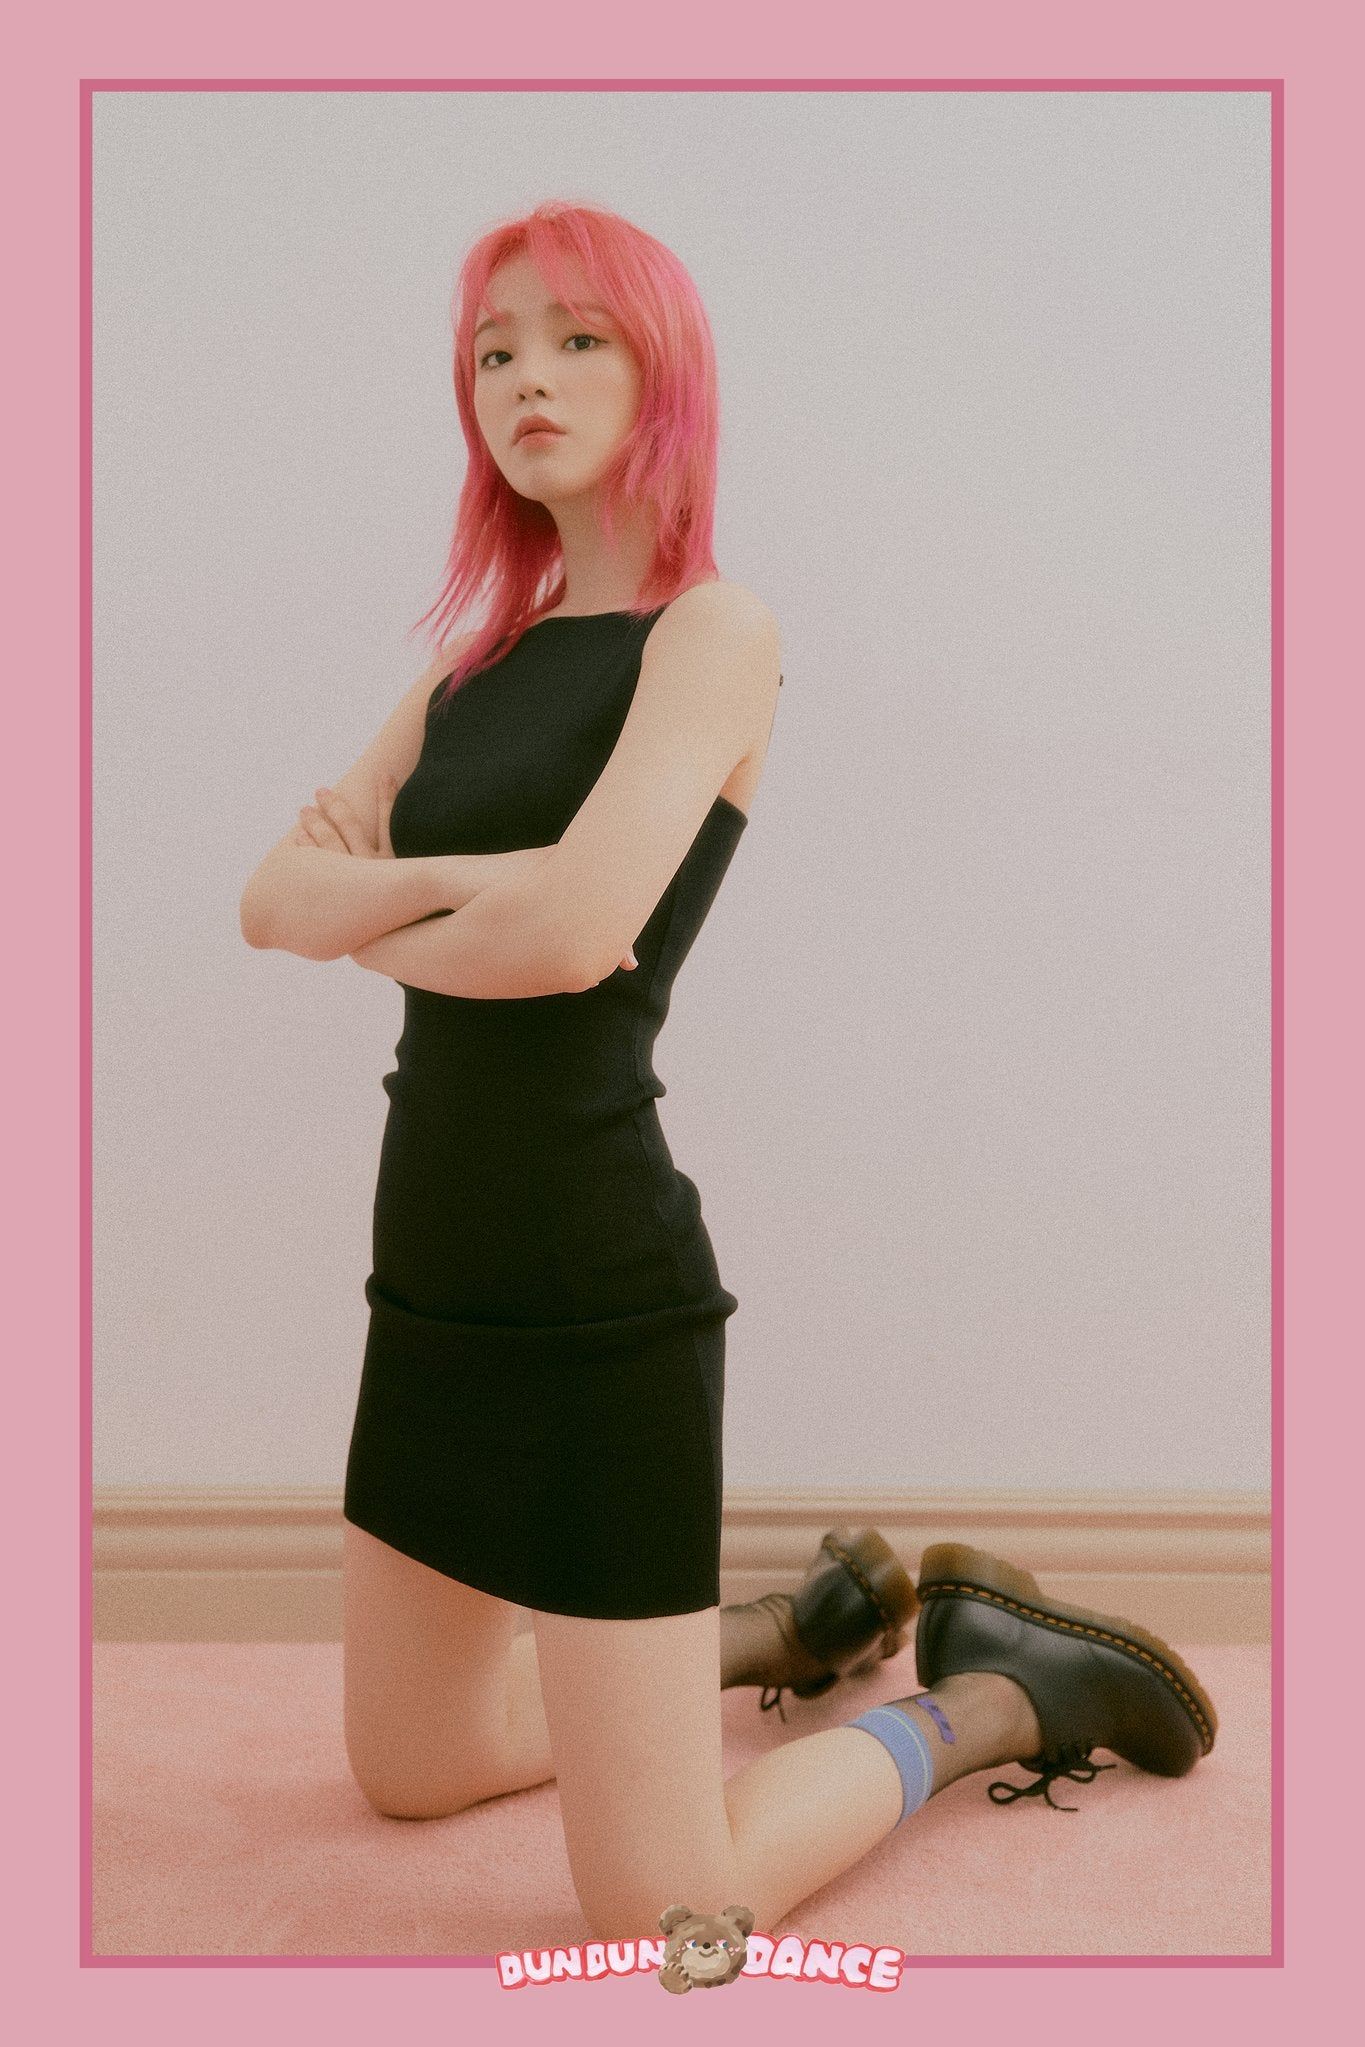 picture of Seunghee in a black dress, kneeling